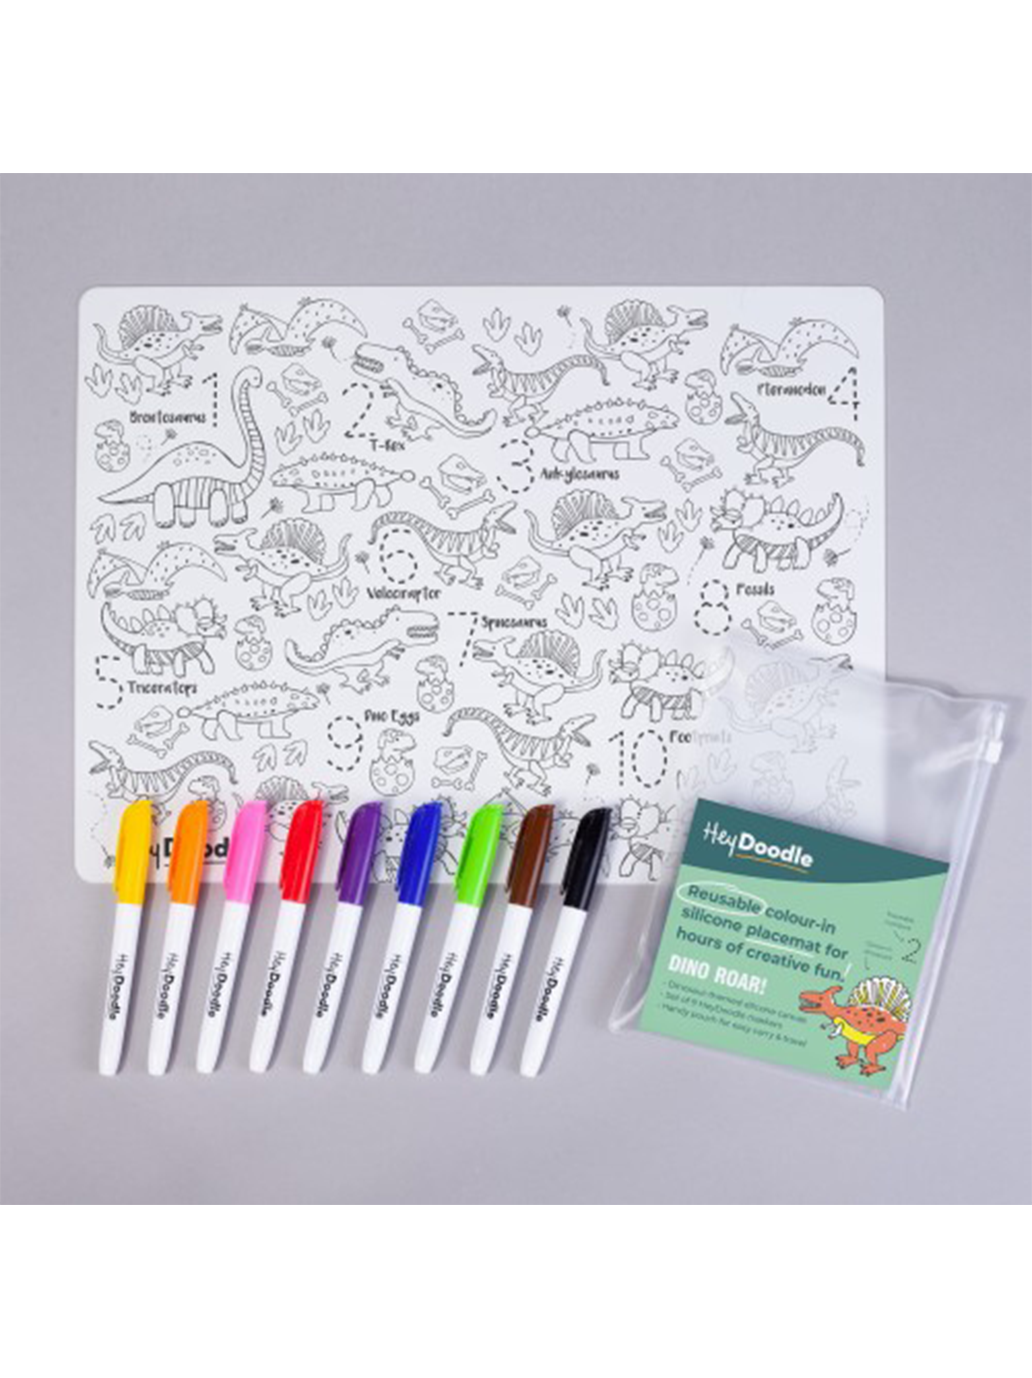 Large silicone mat for repeated coloring